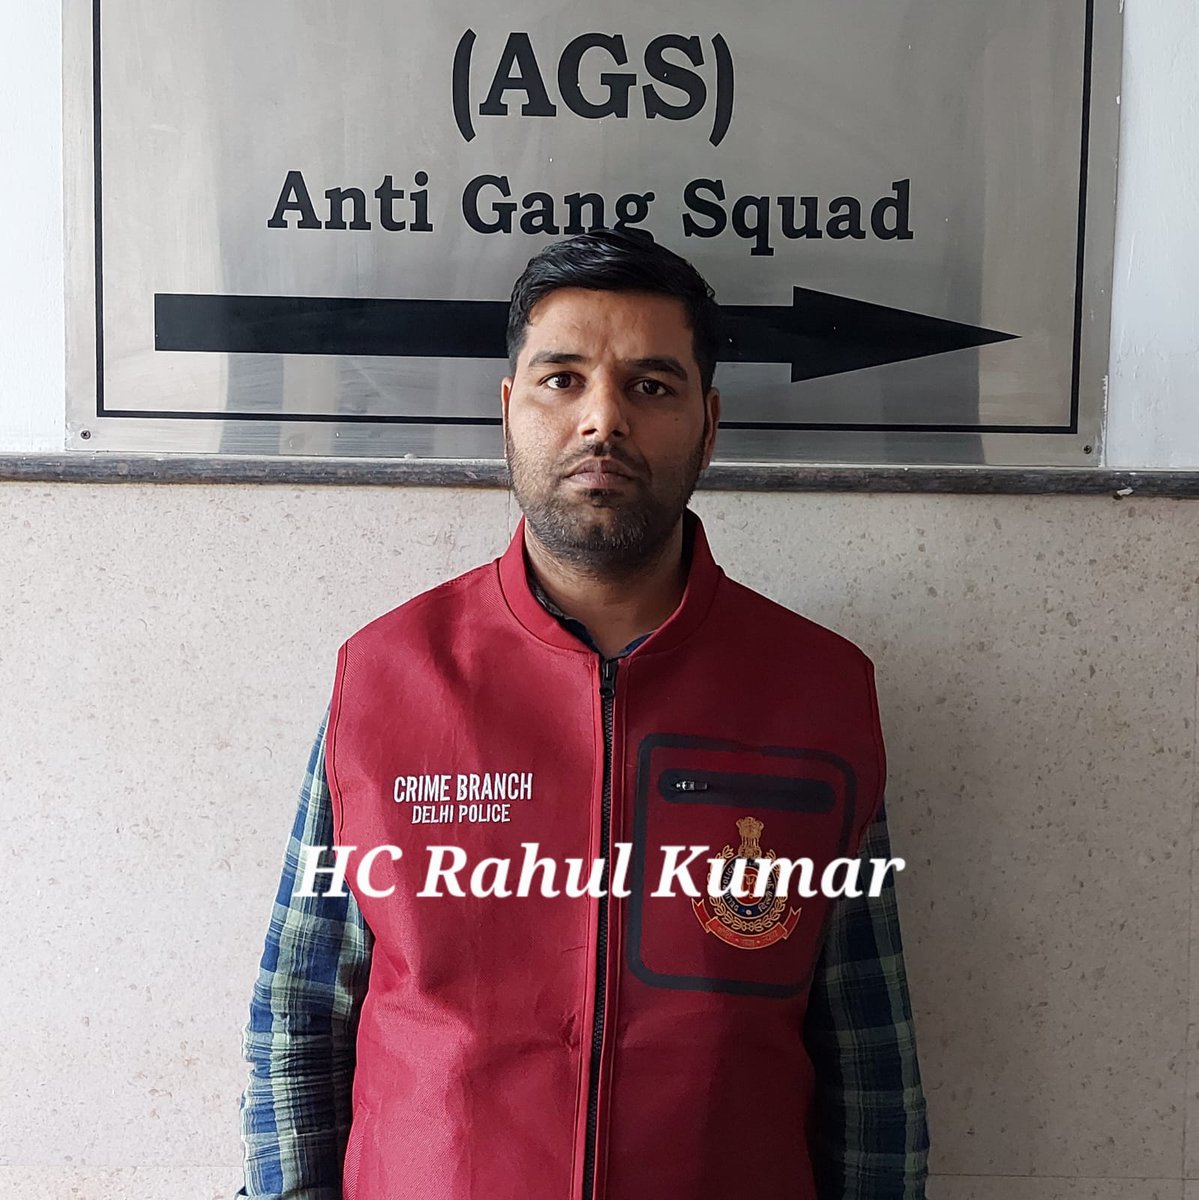 Wanted accused/Declared ‘PO’, absconding since 2016 in a robbery-murder case of PS Paschim Vihar West arrested by AGS, Crime Branch on HC Rahul input Previously involved in 22 cases Kudos to Insp Pawan Kumar, ACP Naresh Kumar and DCP @amitgoelips @DelhiPolice @sanjaybhatia111